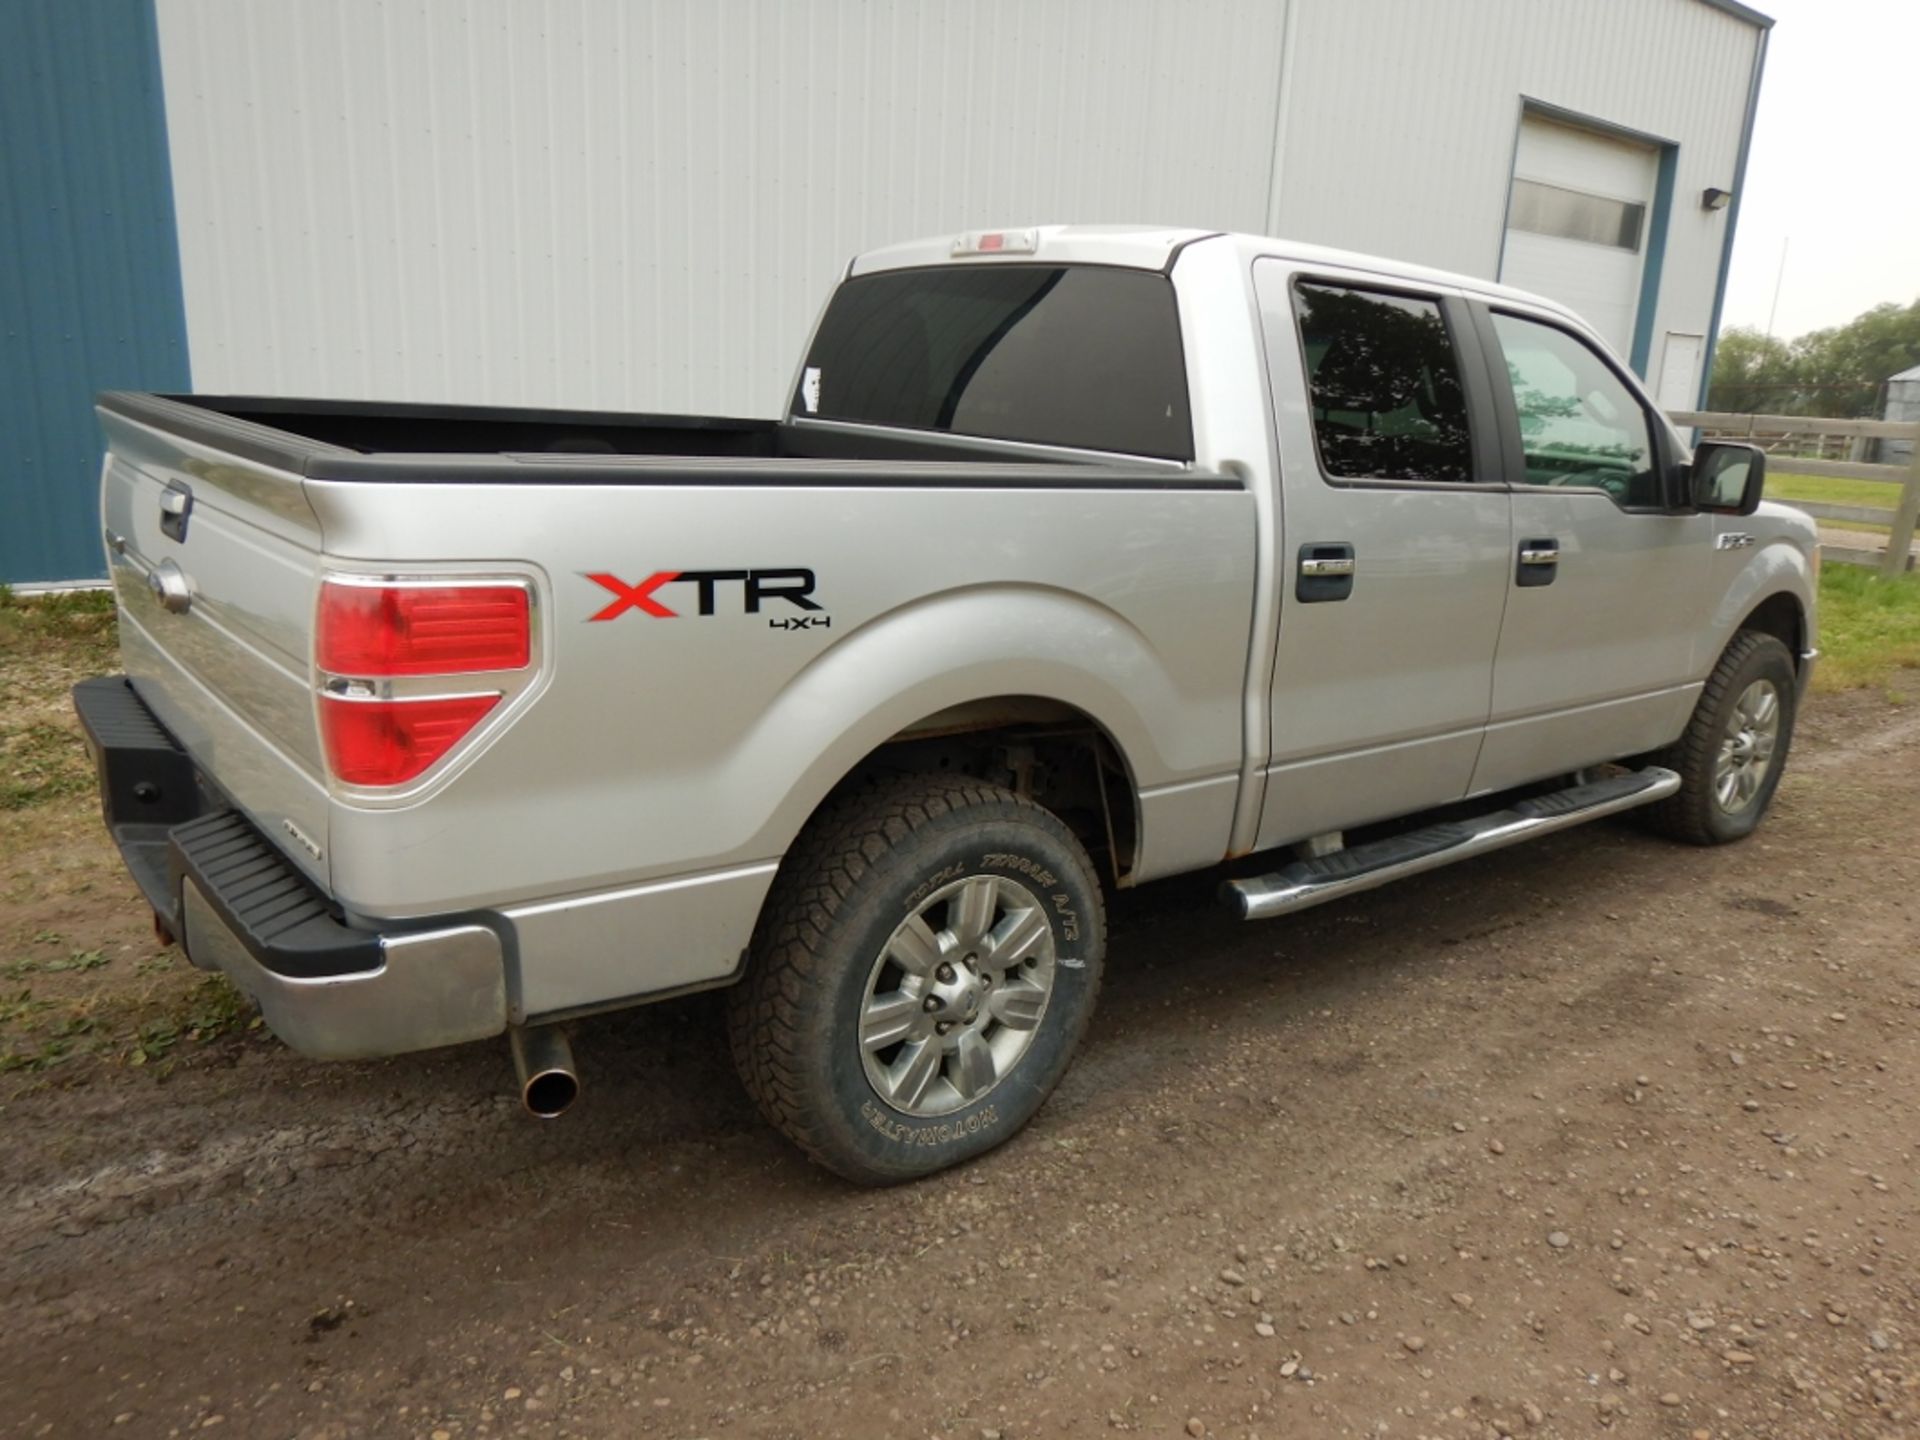 2011 FORD F-150 XTR P/U, 5.4L V8, 4X4, CREW CAB, SHORT BOX, CLOTH INT., A/T, 190,651 KM'S SHOWING, - Image 8 of 22